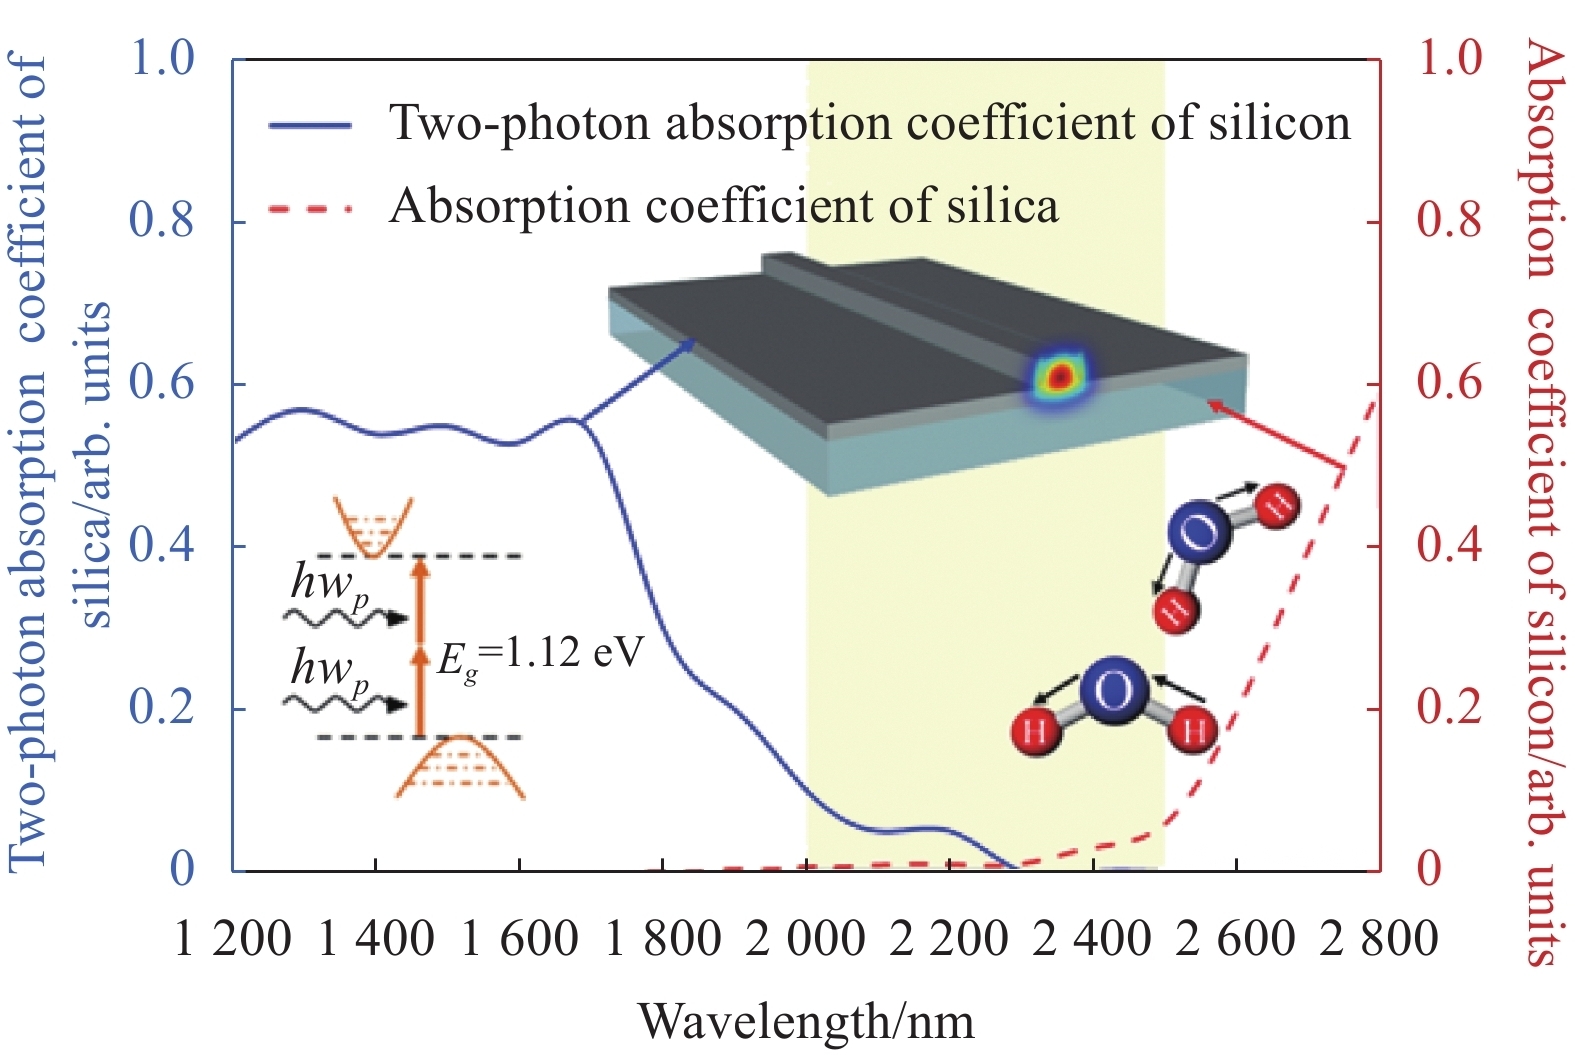 Silicon waveguide devices based on SOI have low two-photon absorption and low BOX absorption in the short-wavelength mid-IR band[22, 25-26]